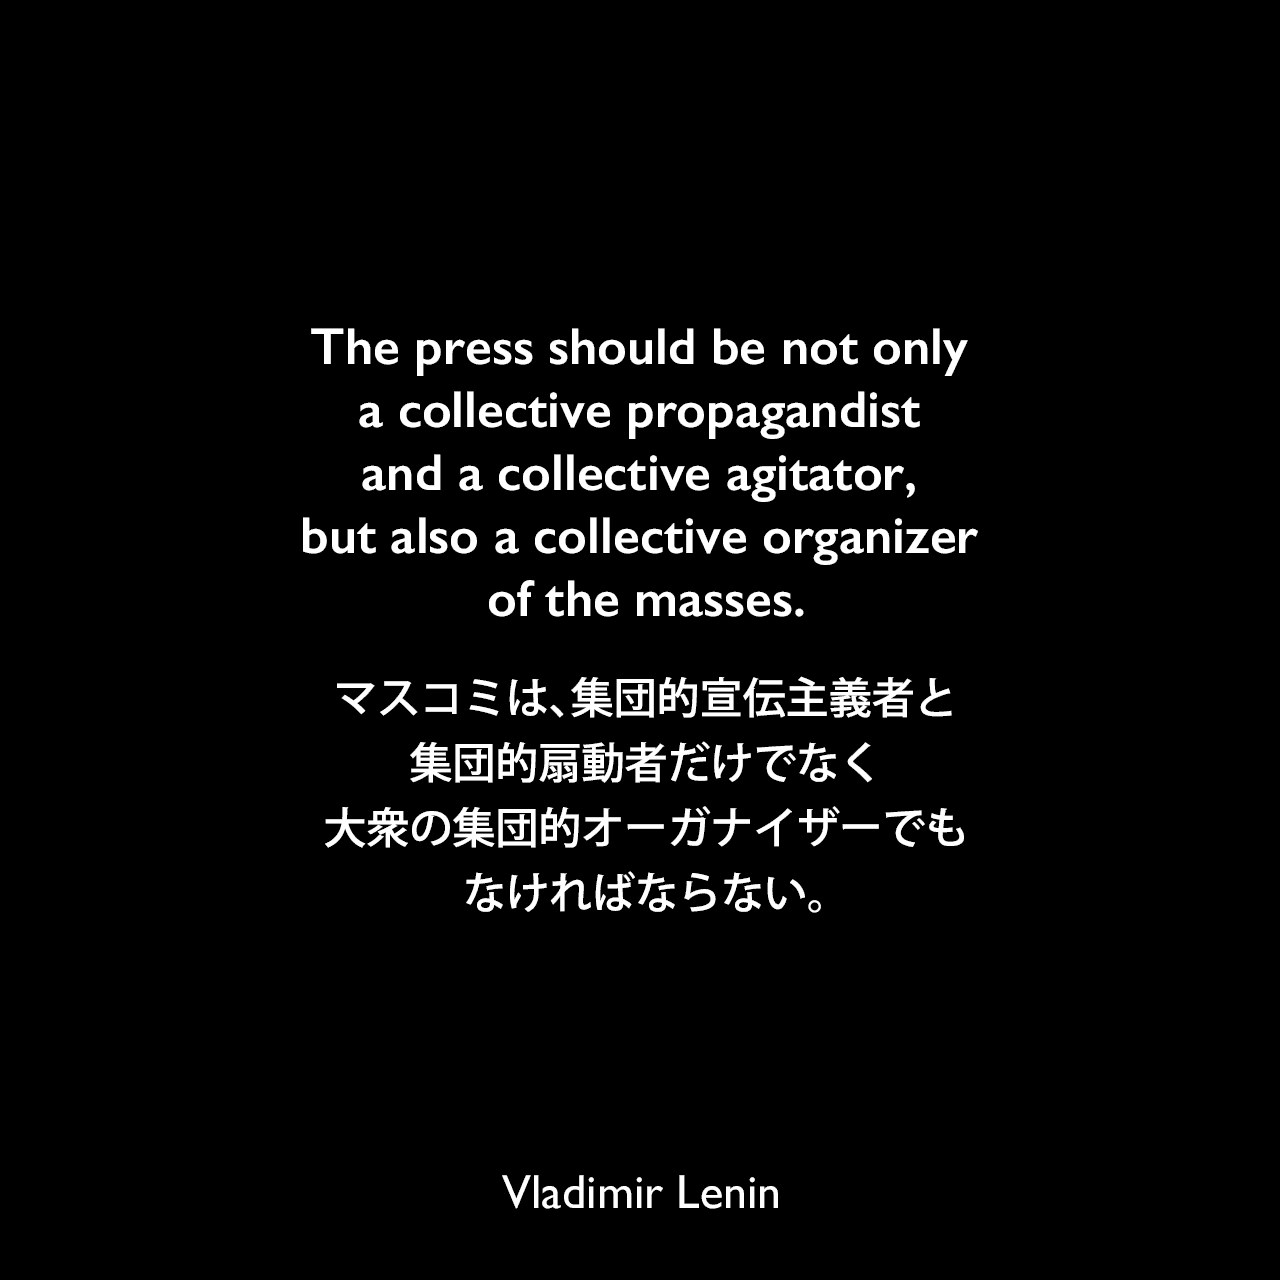 The press should be not only a collective propagandist and a collective agitator, but also a collective organizer of the masses.マスコミは、集団的宣伝主義者と集団的扇動者だけでなく、大衆の集団的オーガナイザーでもなければならない。Vladimir Lenin